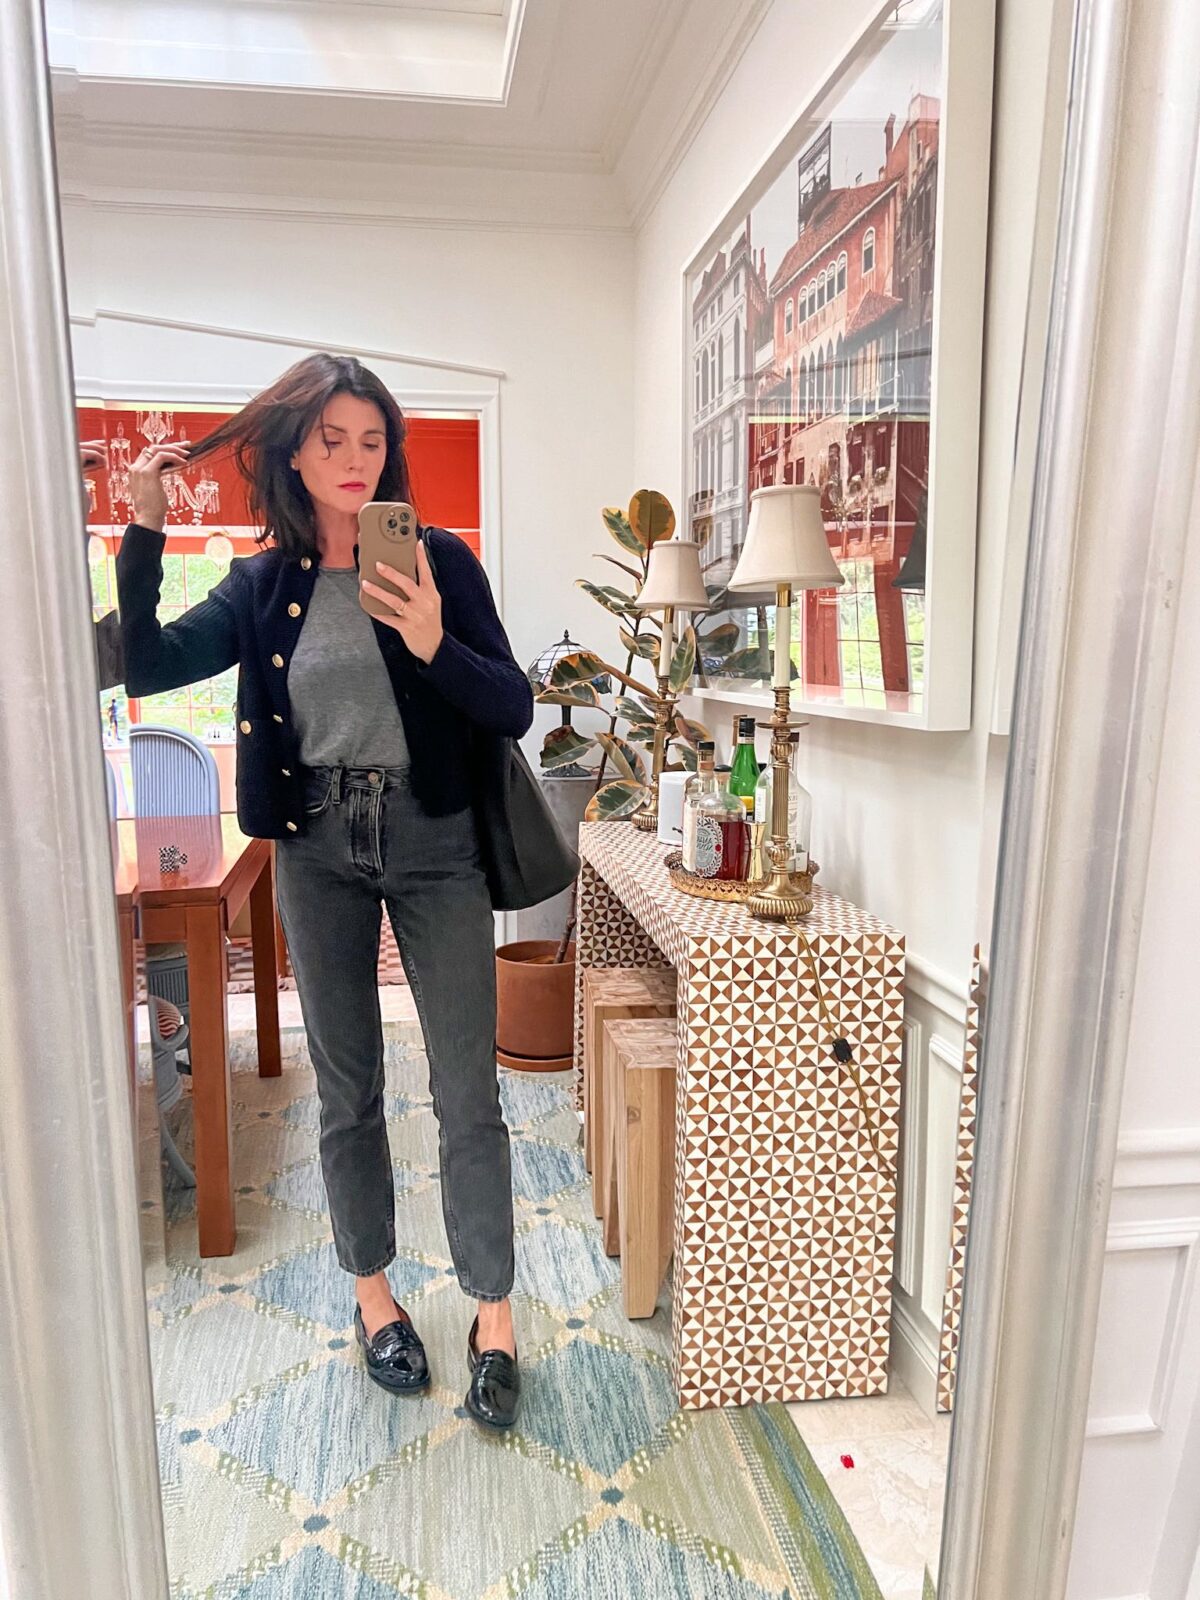 Mirror selfie of a woman wearing gray denim, a navy cardigan, and a gray shirt. 